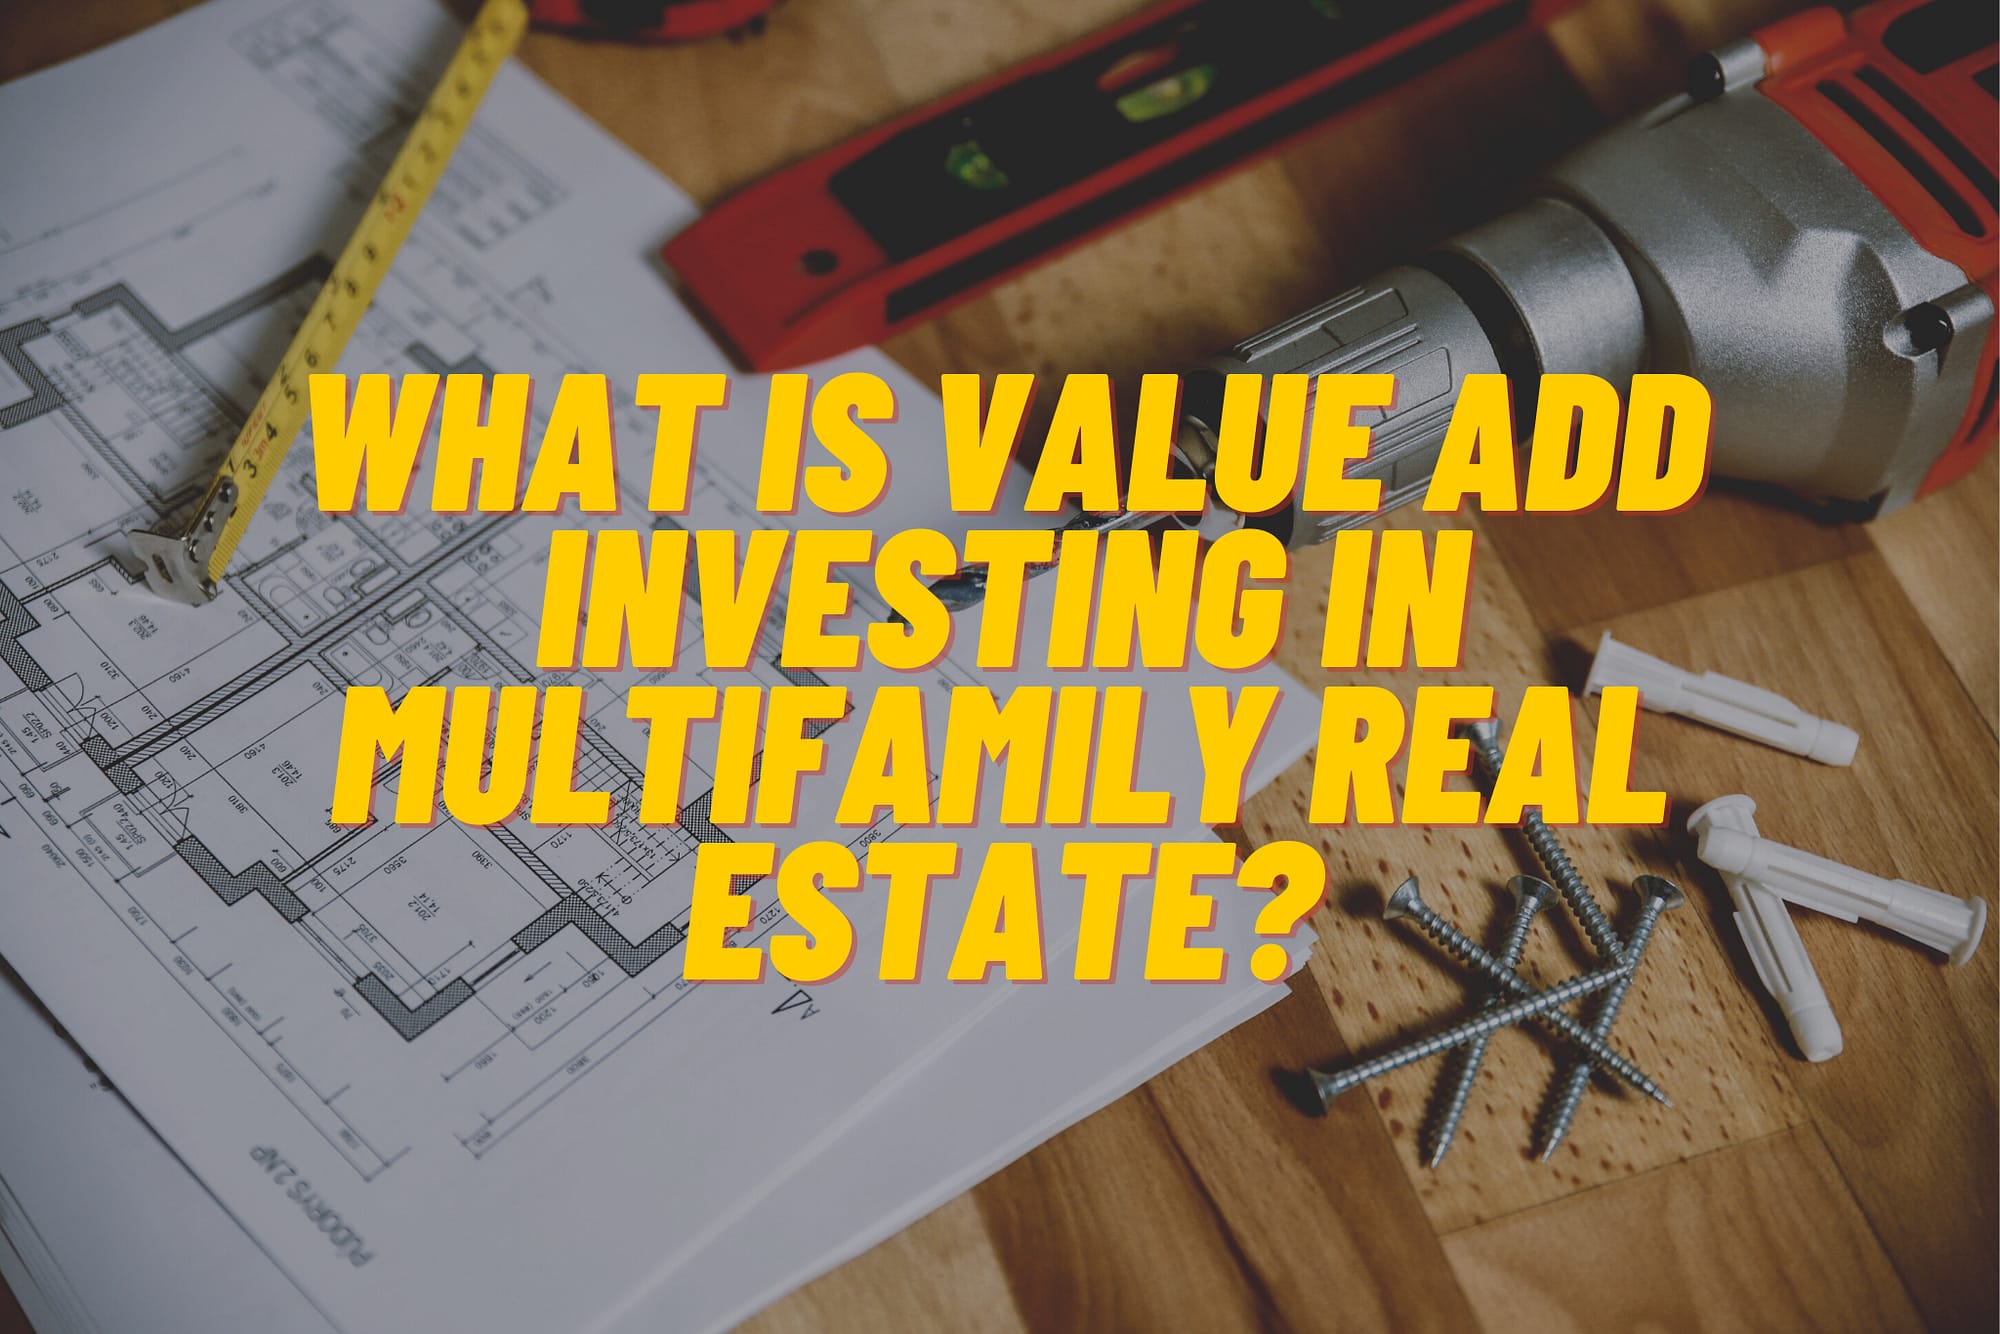 What Is Value Add Investing in Multifamily Real Estate